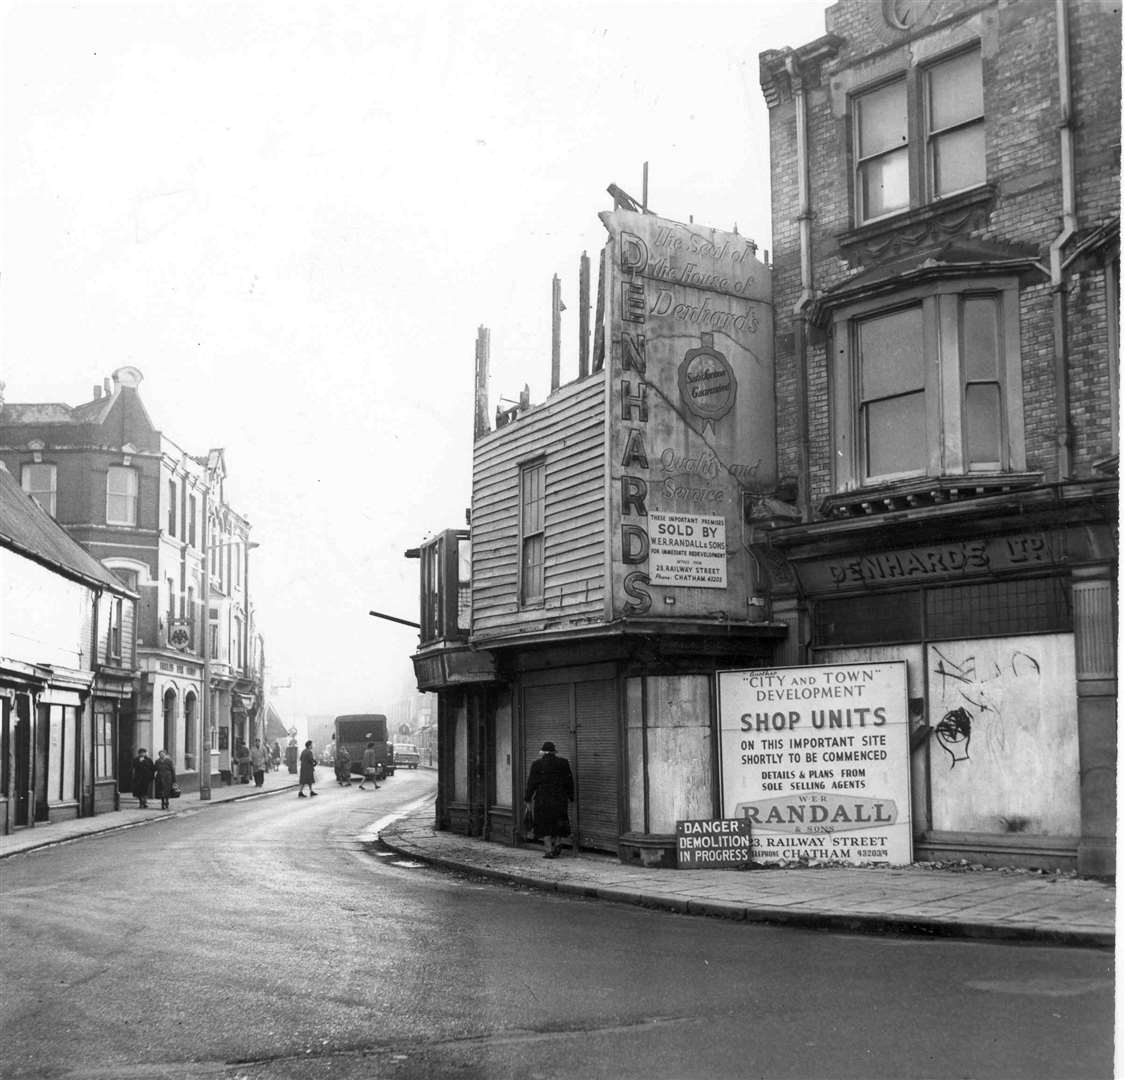 The sign indicates that demolition was underway to eradicate a traffic blackspot in Strood High Street in 1961